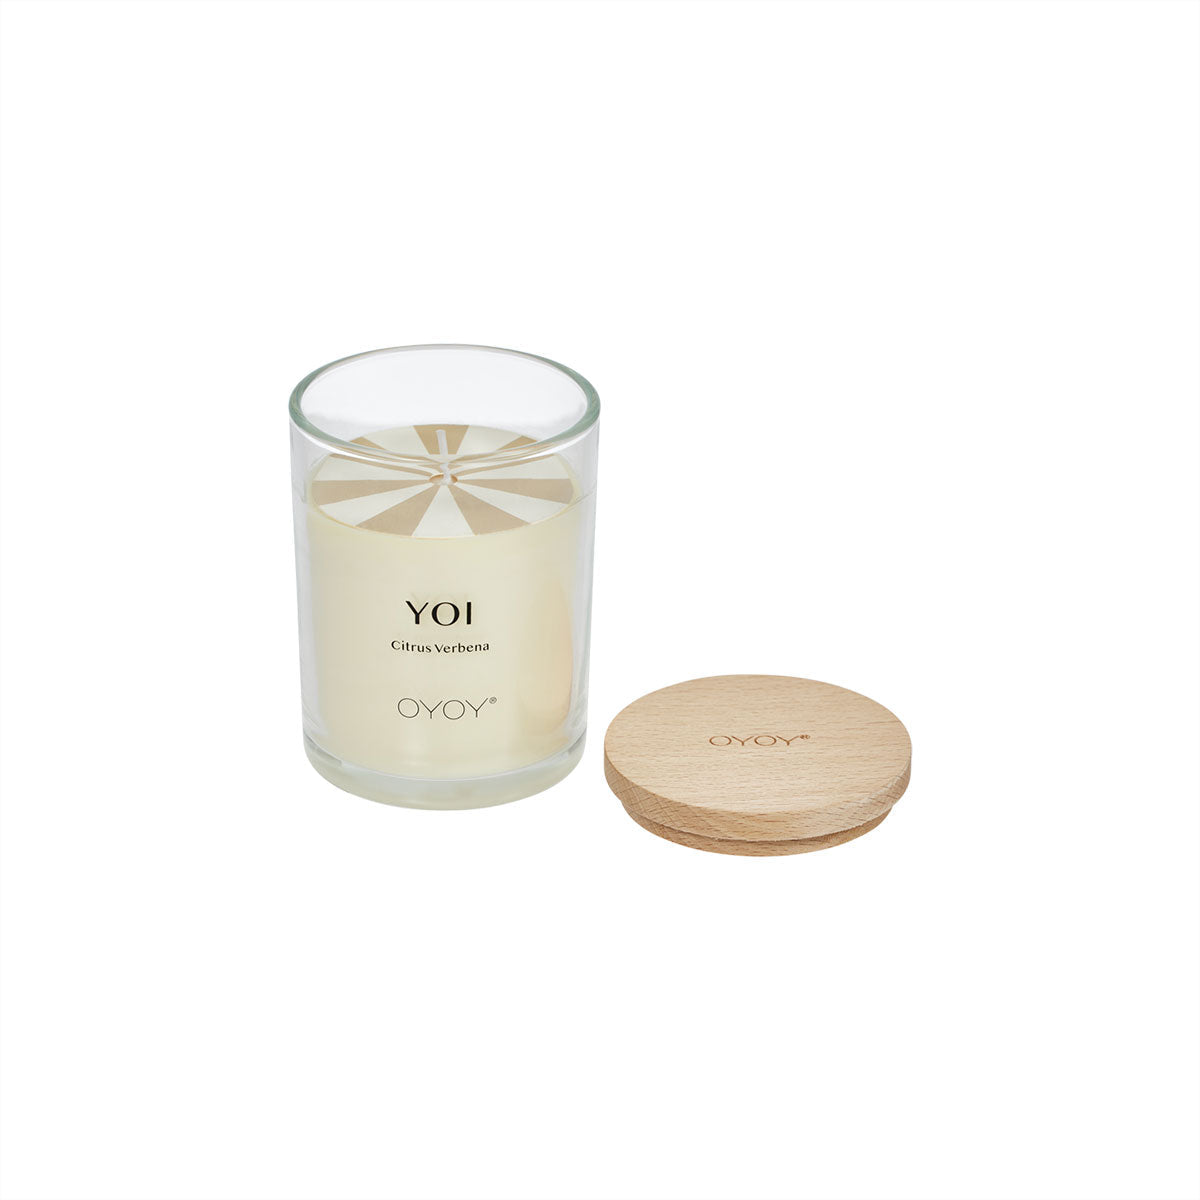 Yoi Scented Candle